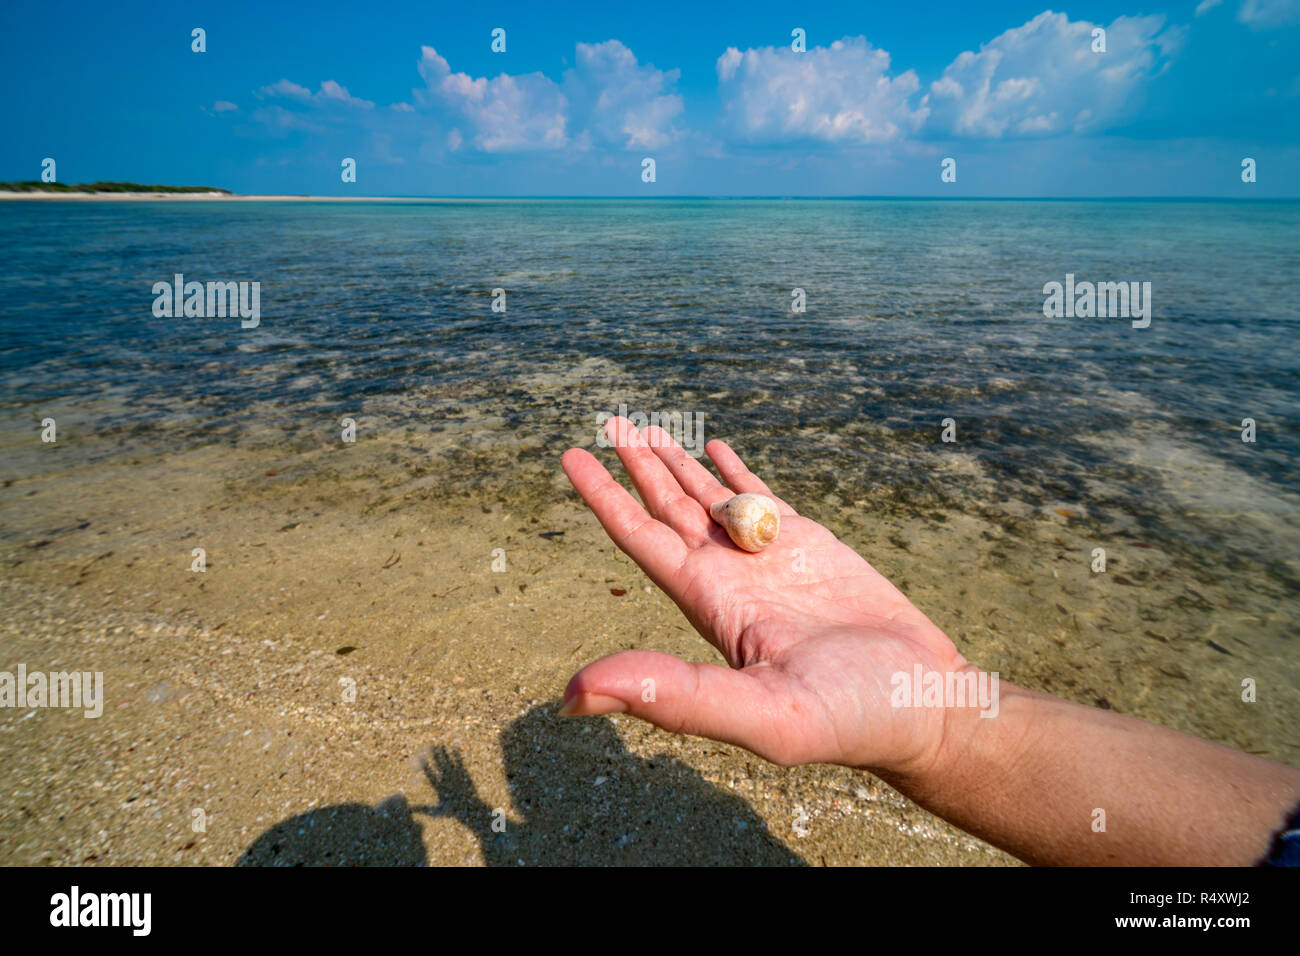 A tourist holds up a shell on a beach on Paradise Island, Mozambique. Stock Photo